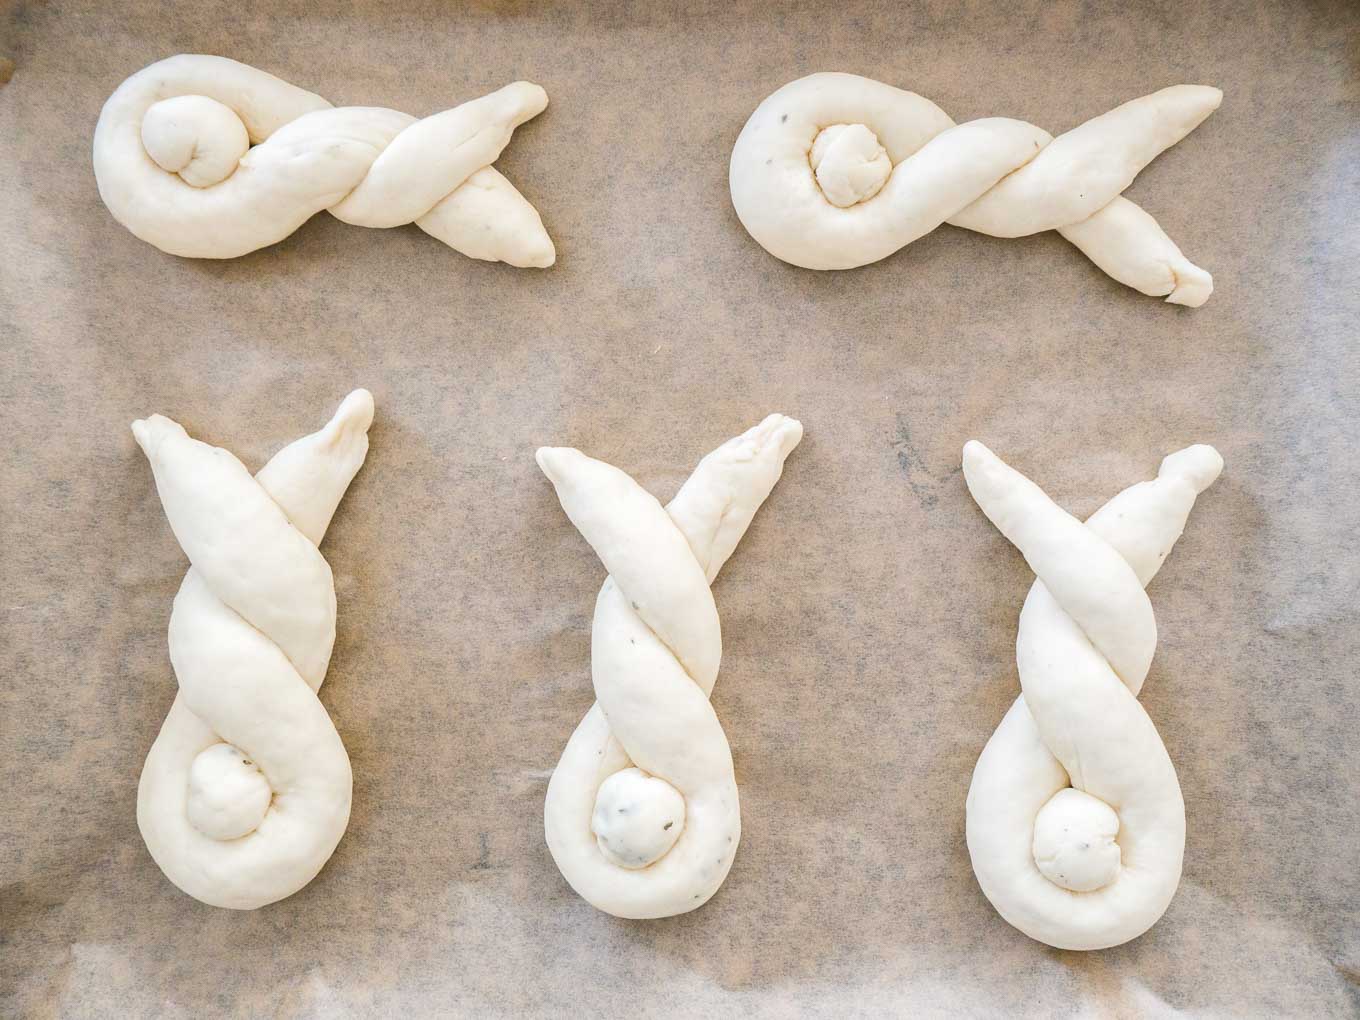 Several bunnies made from dough on brown parchment paper.